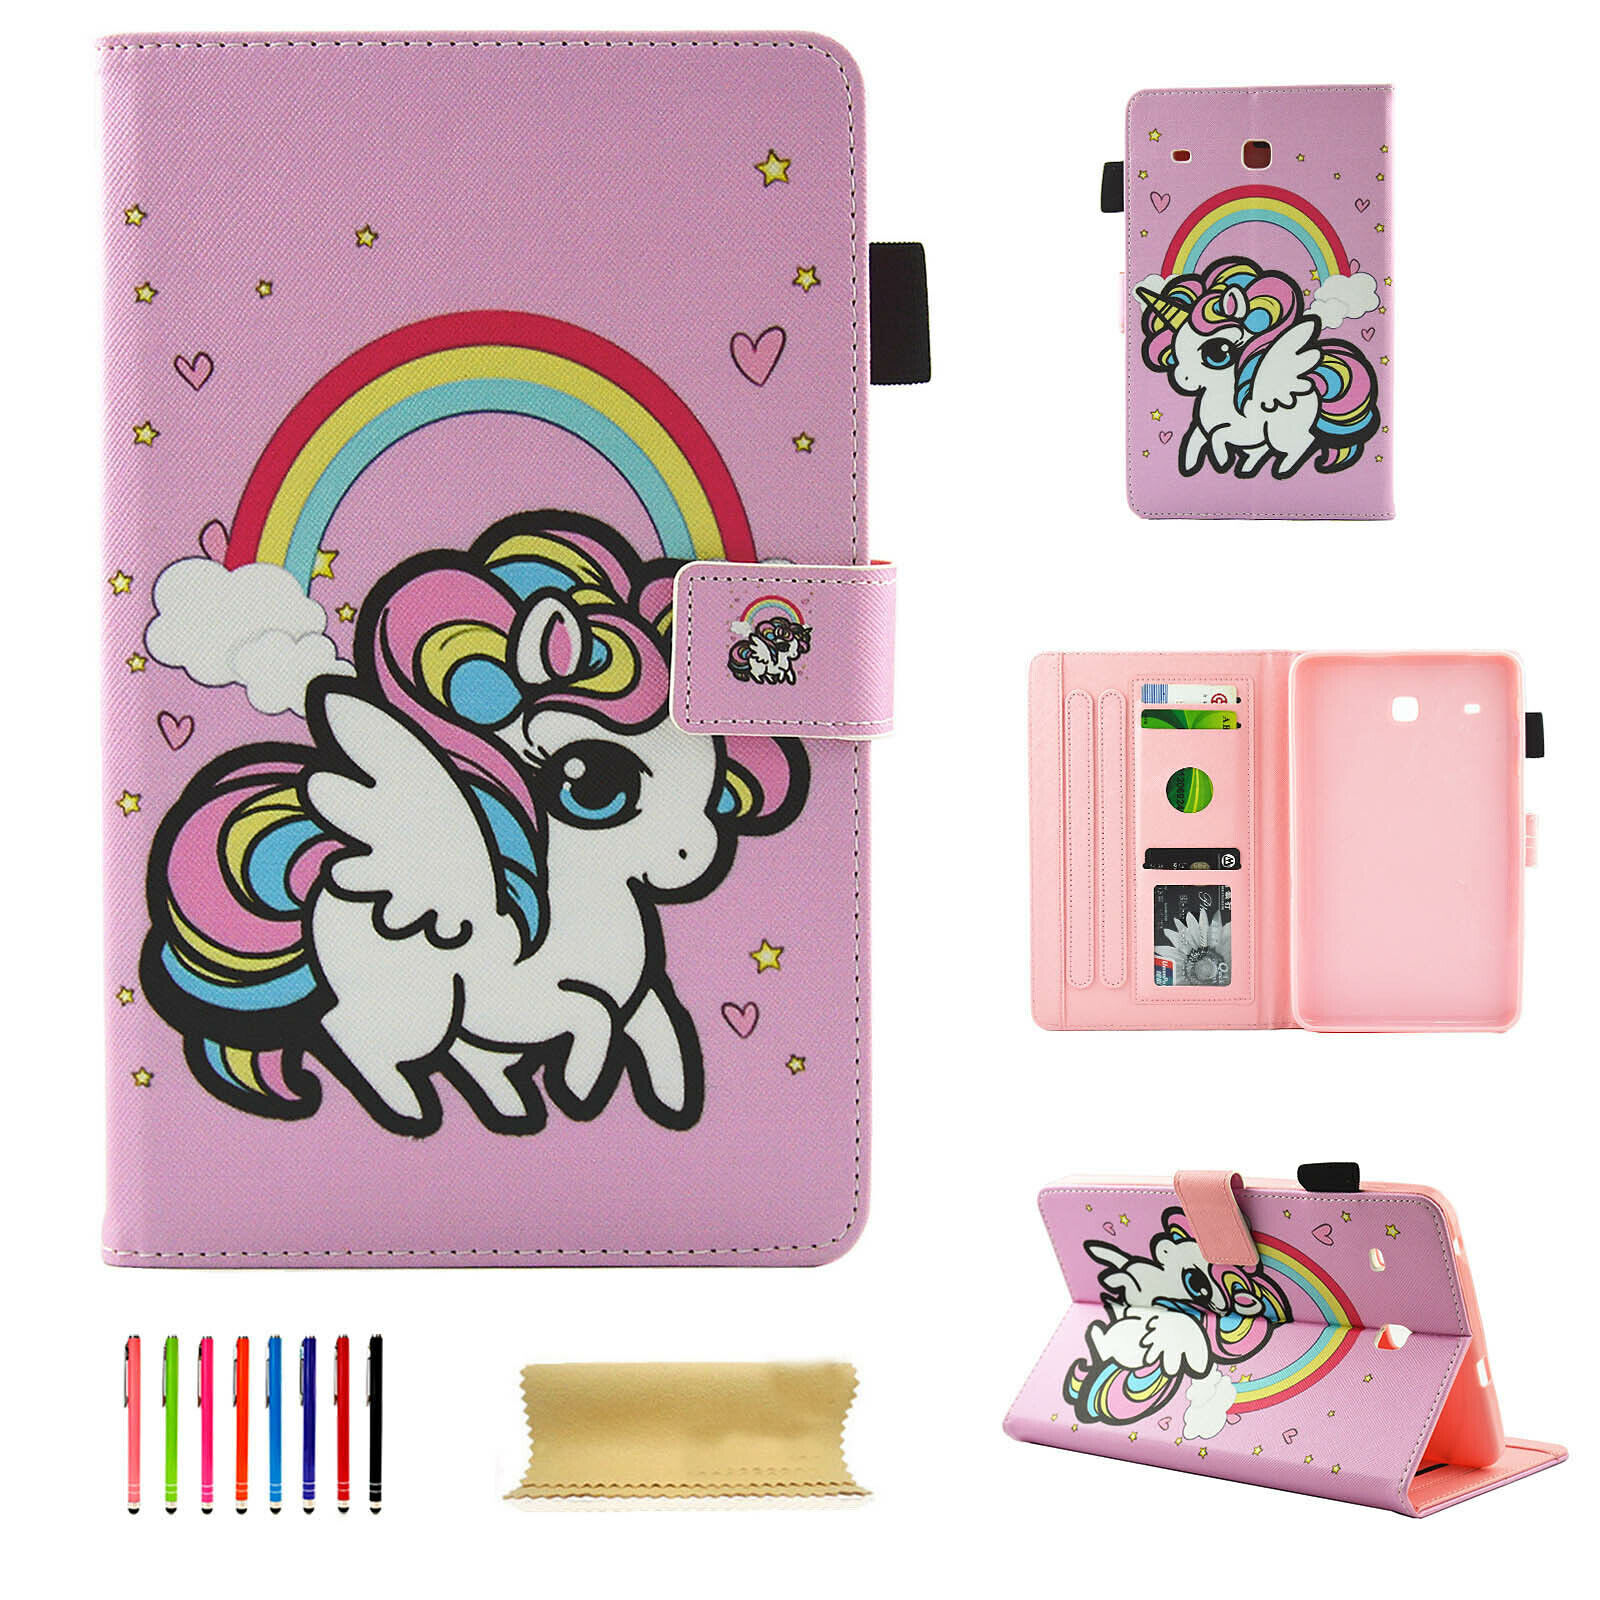 Unicorn Stand Card Folio Case Cover Samsung Galaxy Tablet Fr T280/T377/T380/T560